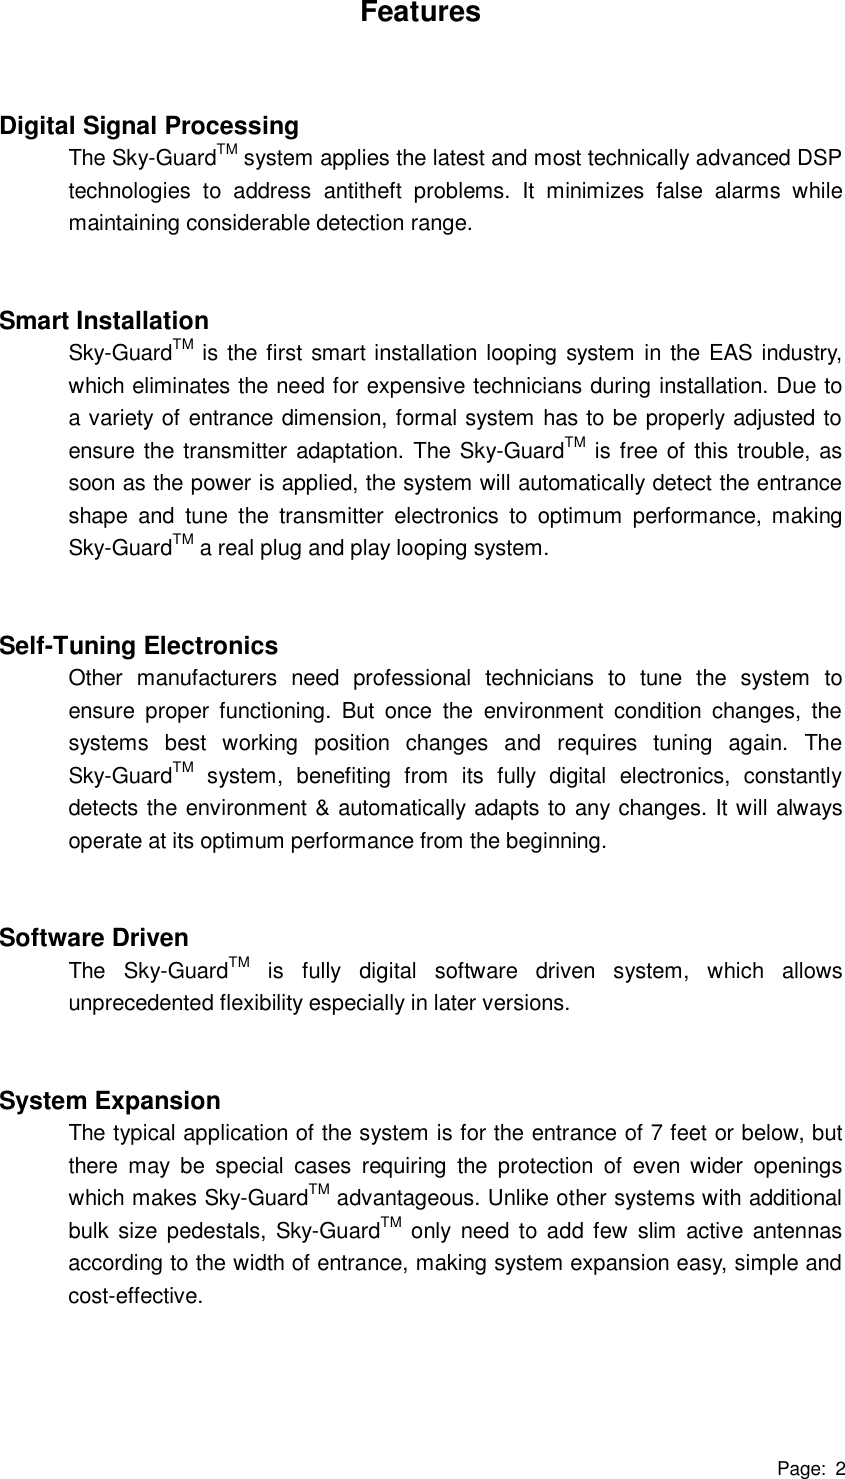 Page: 2 Features   Digital Signal Processing The Sky-GuardTM system applies the latest and most technically advanced DSP technologies to address antitheft problems. It minimizes false alarms while maintaining considerable detection range.   Smart Installation Sky-GuardTM is the first smart installation looping system in the EAS industry, which eliminates the need for expensive technicians during installation. Due to a variety of entrance dimension, formal system has to be properly adjusted to ensure the transmitter adaptation. The Sky-GuardTM is free of this trouble, as soon as the power is applied, the system will automatically detect the entrance shape and tune the transmitter electronics to optimum performance, making Sky-GuardTM a real plug and play looping system.   Self-Tuning Electronics Other manufacturers need professional technicians to tune the system to ensure proper functioning. But once the environment condition changes, the systems best working position changes and requires tuning again. The Sky-GuardTM system, benefiting from its fully digital electronics, constantly detects the environment &amp; automatically adapts to any changes. It will always operate at its optimum performance from the beginning.   Software Driven The Sky-GuardTM is fully digital software driven system, which allows unprecedented flexibility especially in later versions.   System Expansion The typical application of the system is for the entrance of 7 feet or below, but there may be special cases requiring the protection of even wider openings which makes Sky-GuardTM advantageous. Unlike other systems with additional bulk size pedestals, Sky-GuardTM only need to add few slim active antennas according to the width of entrance, making system expansion easy, simple and cost-effective.      